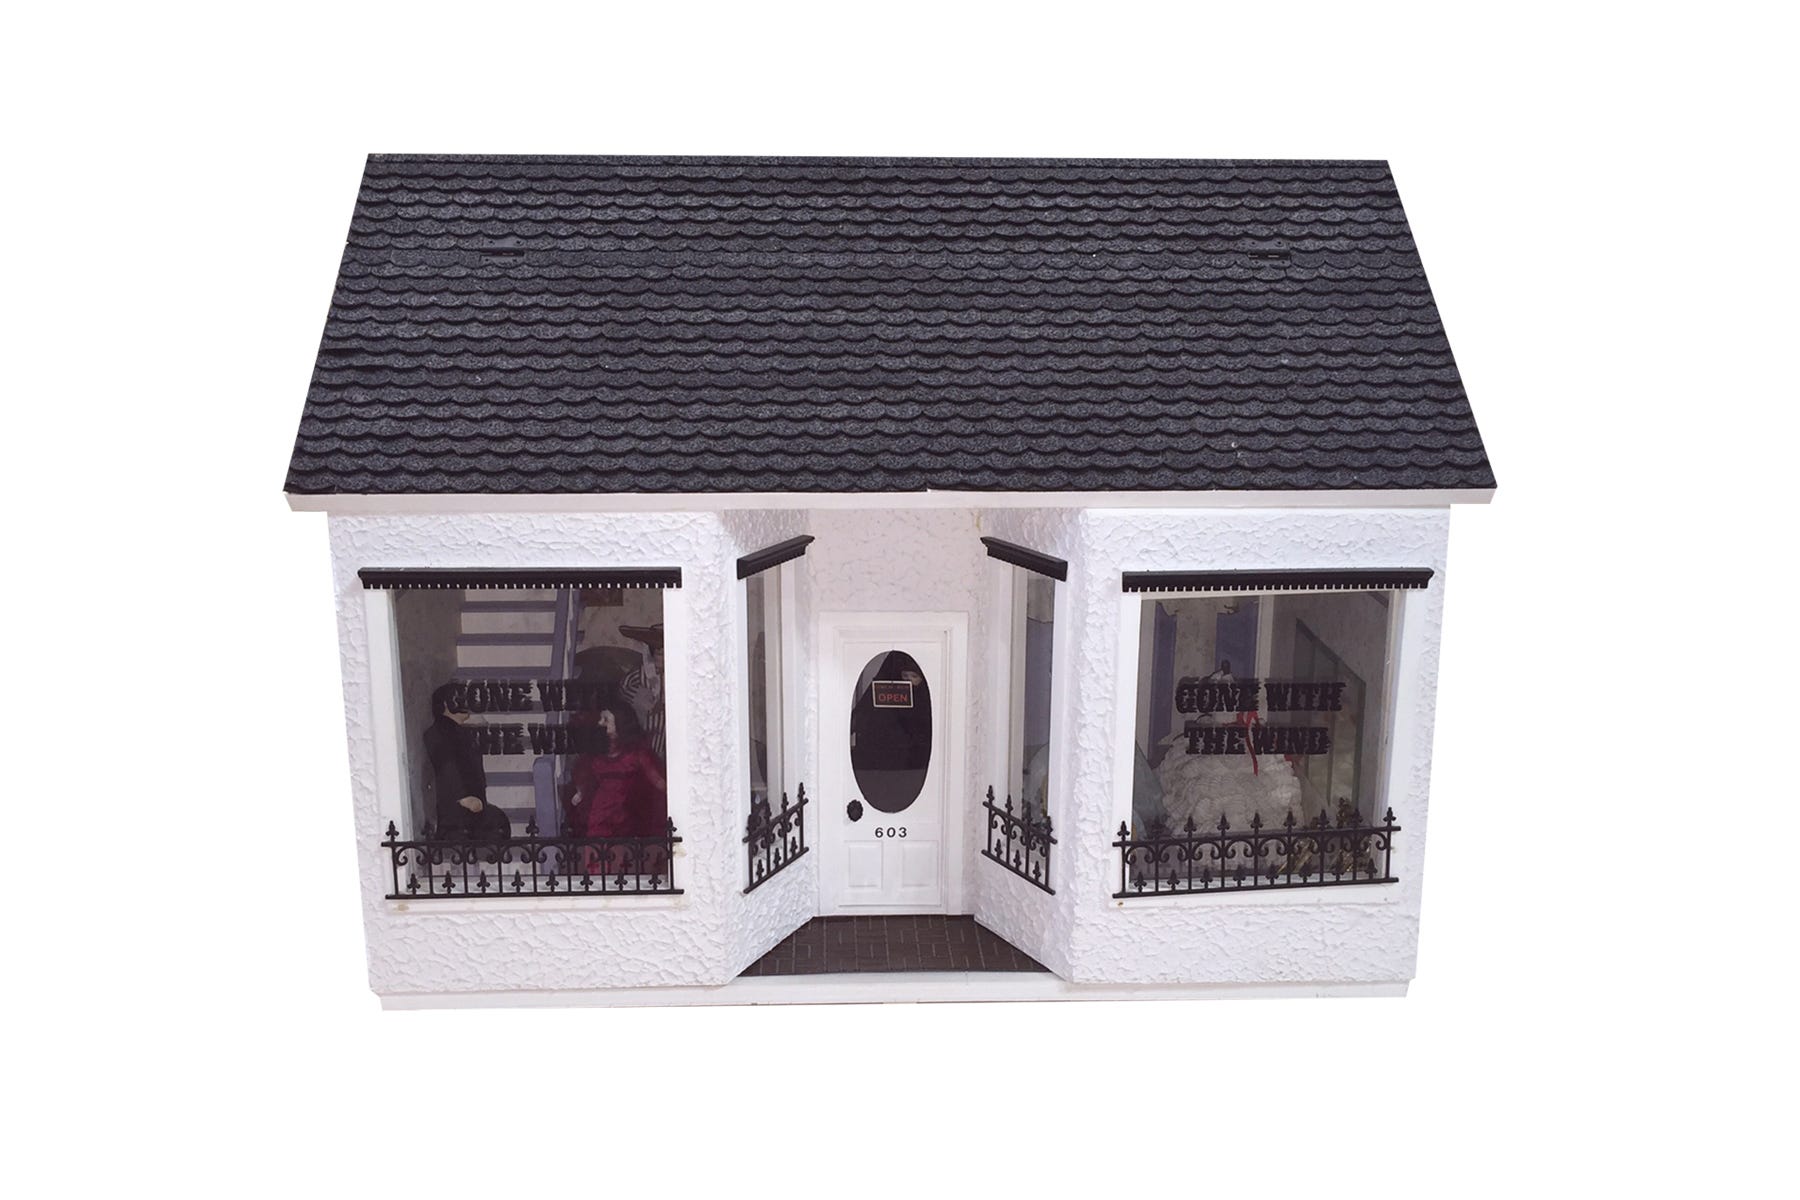 dollhouse manufacturers